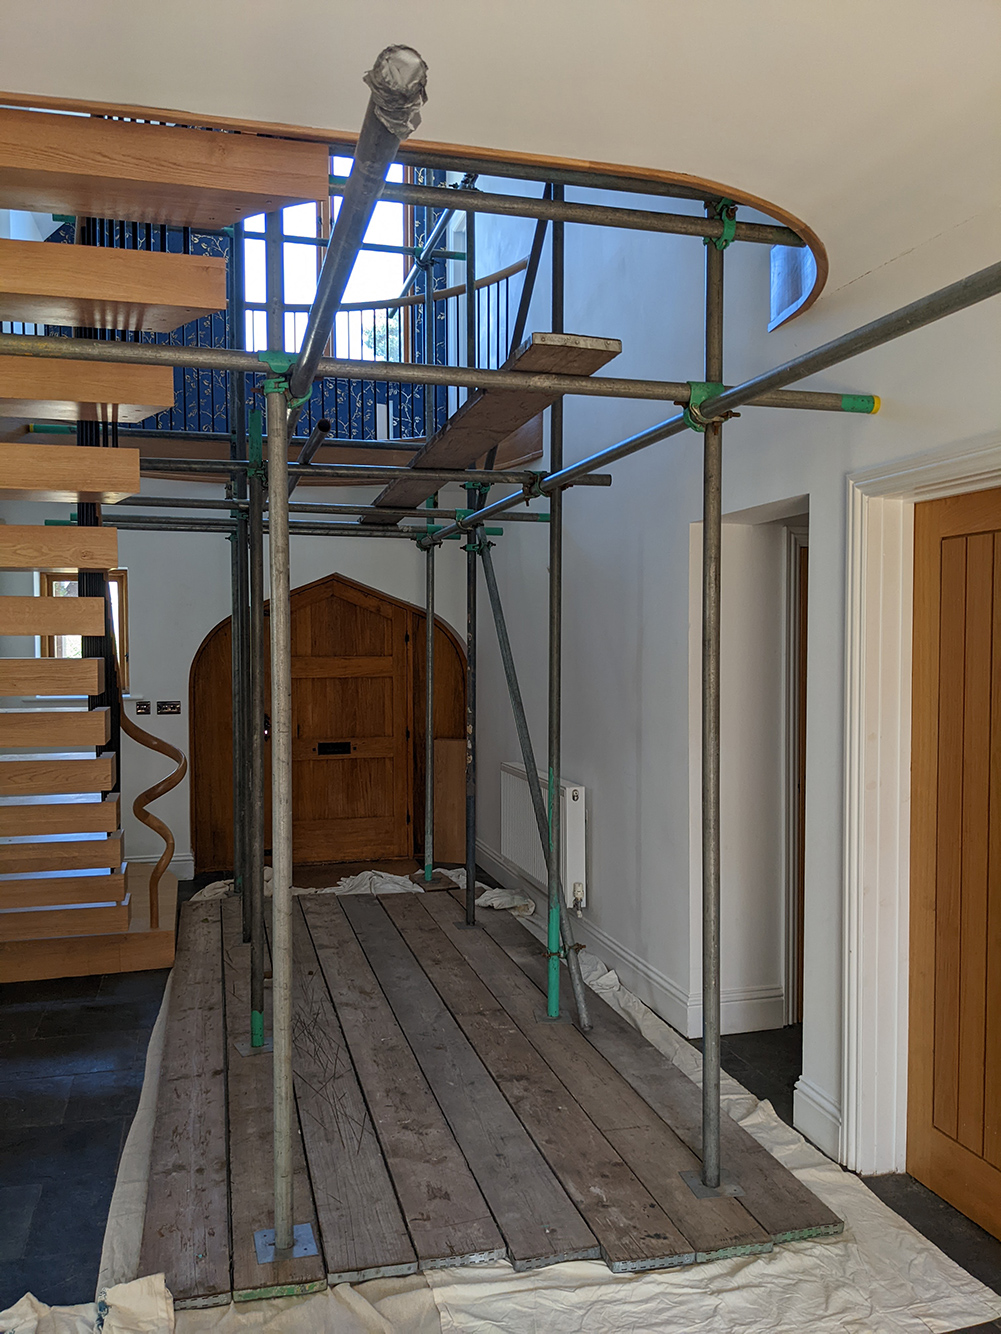 A photo of the internal scaffolding in the hallway